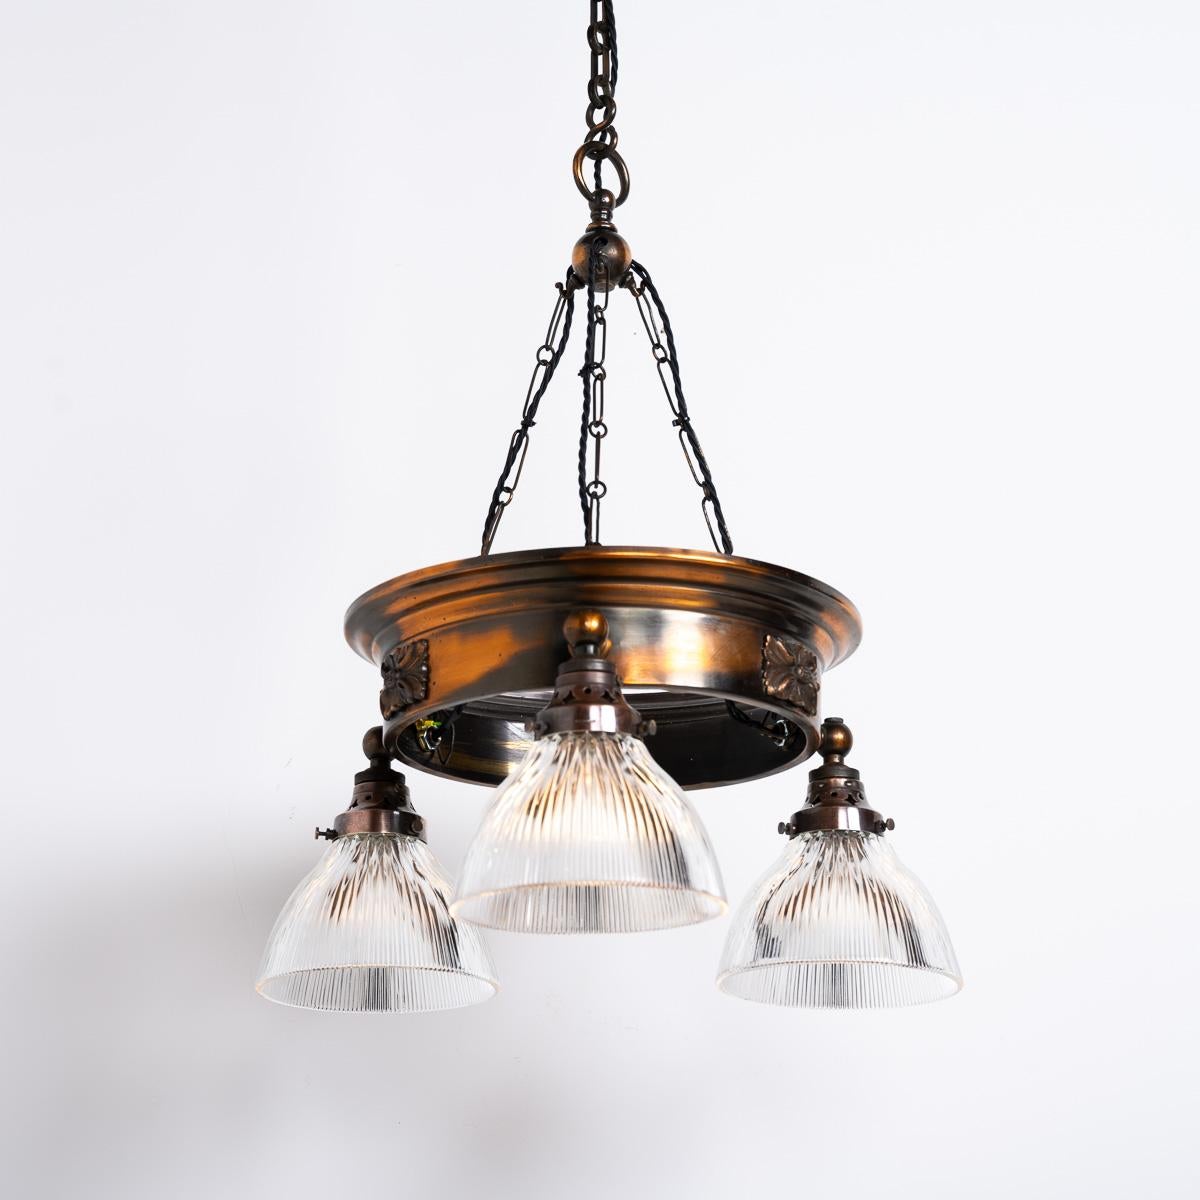 English Antique Copper Ring Chandelier With Prismatic Holophane Glass Shades By Gec For Sale